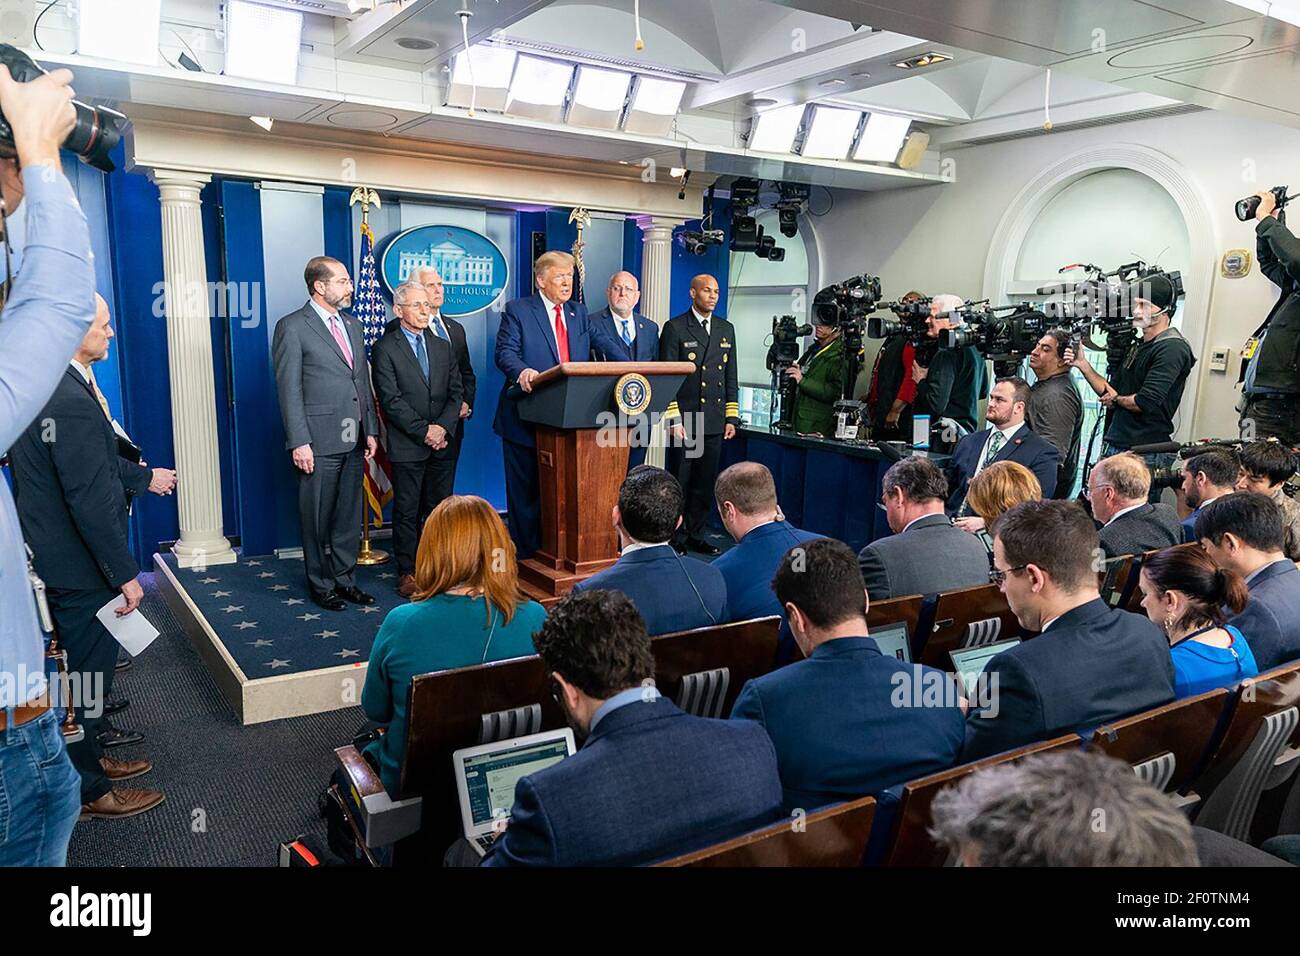 President Donald Trump joined by Vice President Mike Pence delivers remarks at a Coronavirus Task Force update Saturday Feb. 29 2020 in the James S. Brady Press Briefing Room of the White House. Stock Photo